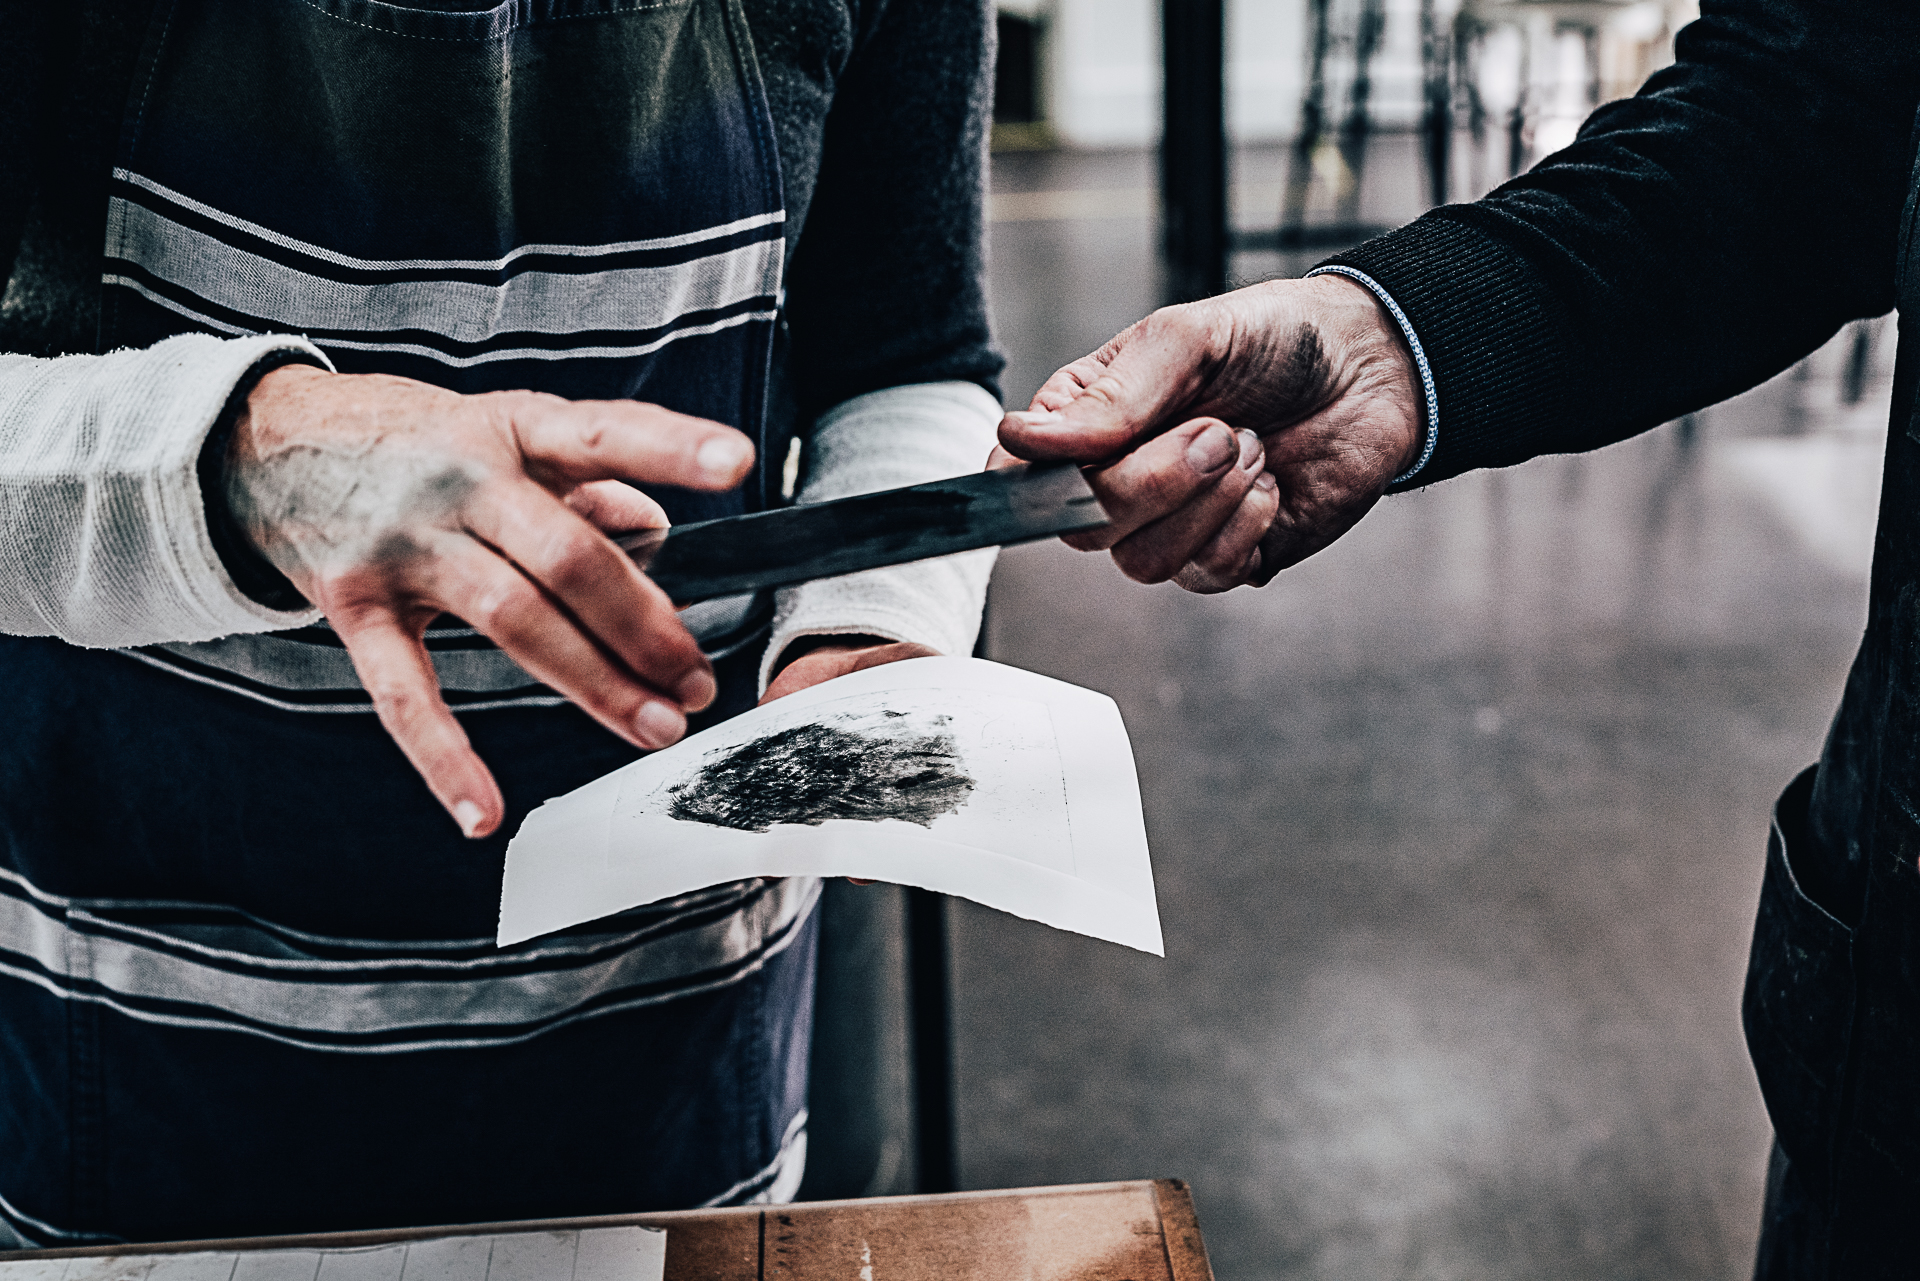 Hand of person wearing a dark jumper passing a small printing plate covered in black ink to another person who is wearing a light top and blue and white striped apron. This person is also holding a piece of white paper with a splotch of black ink in it's centre.